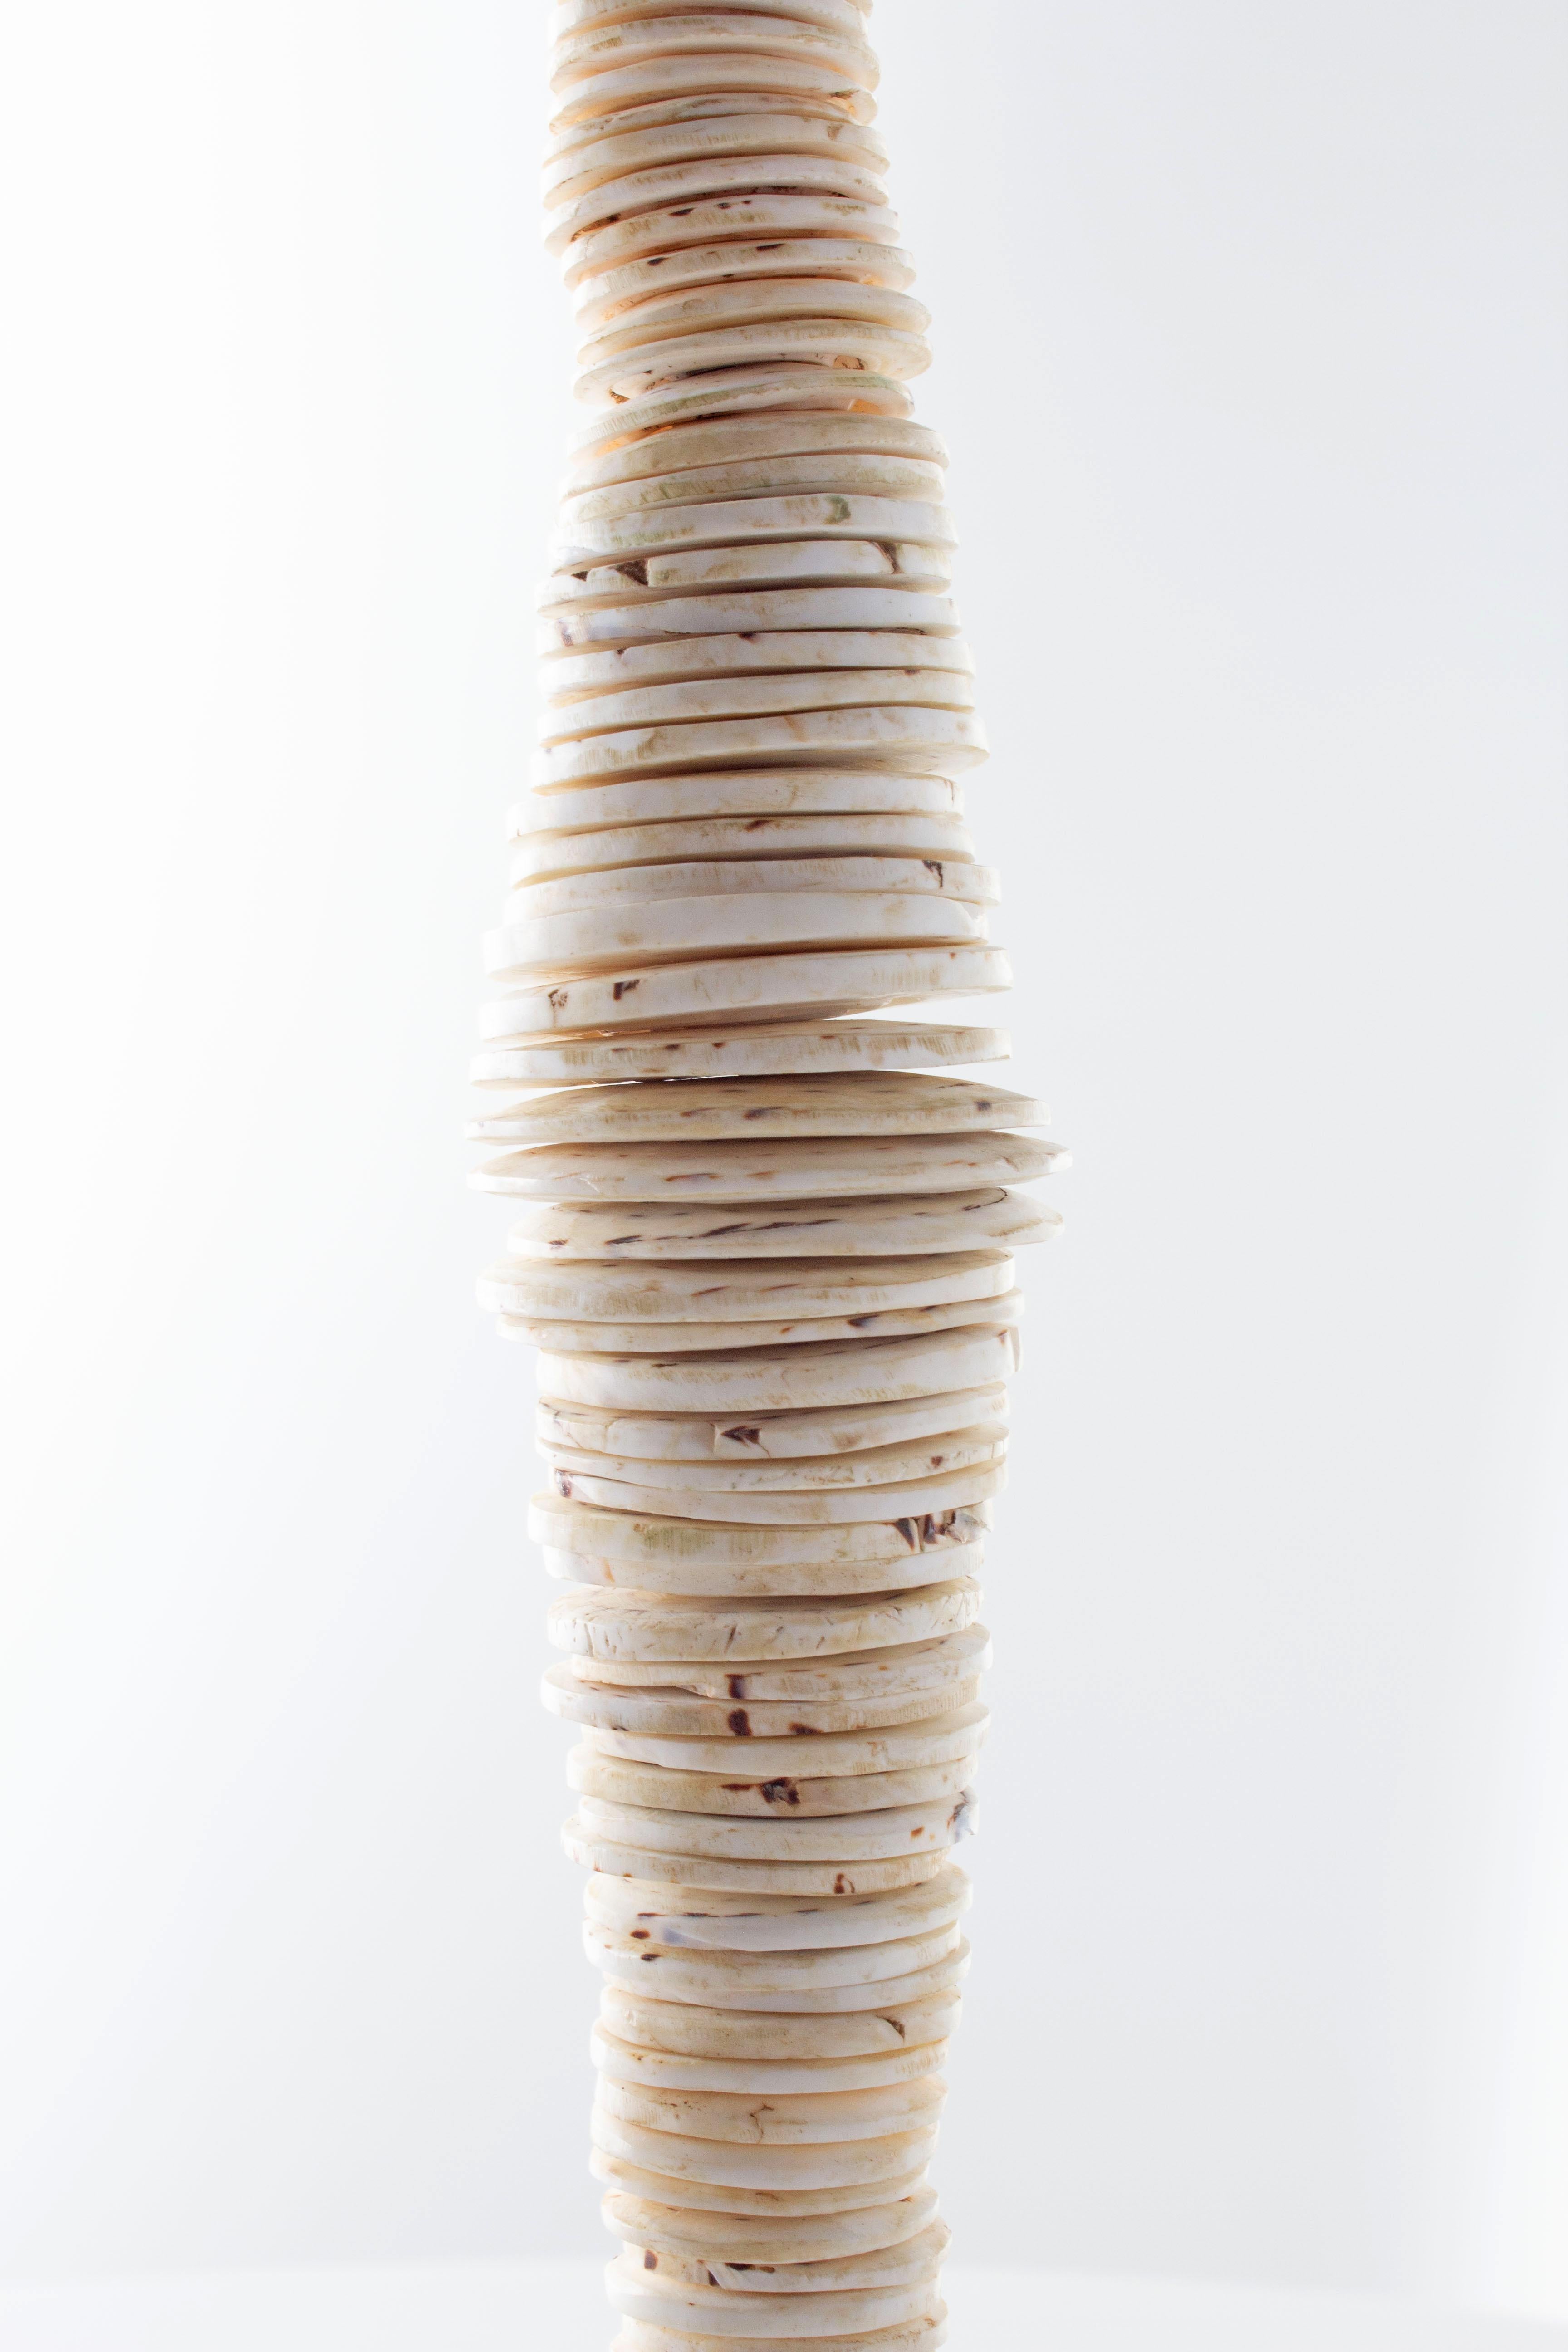 South Asian decorated shell stack.